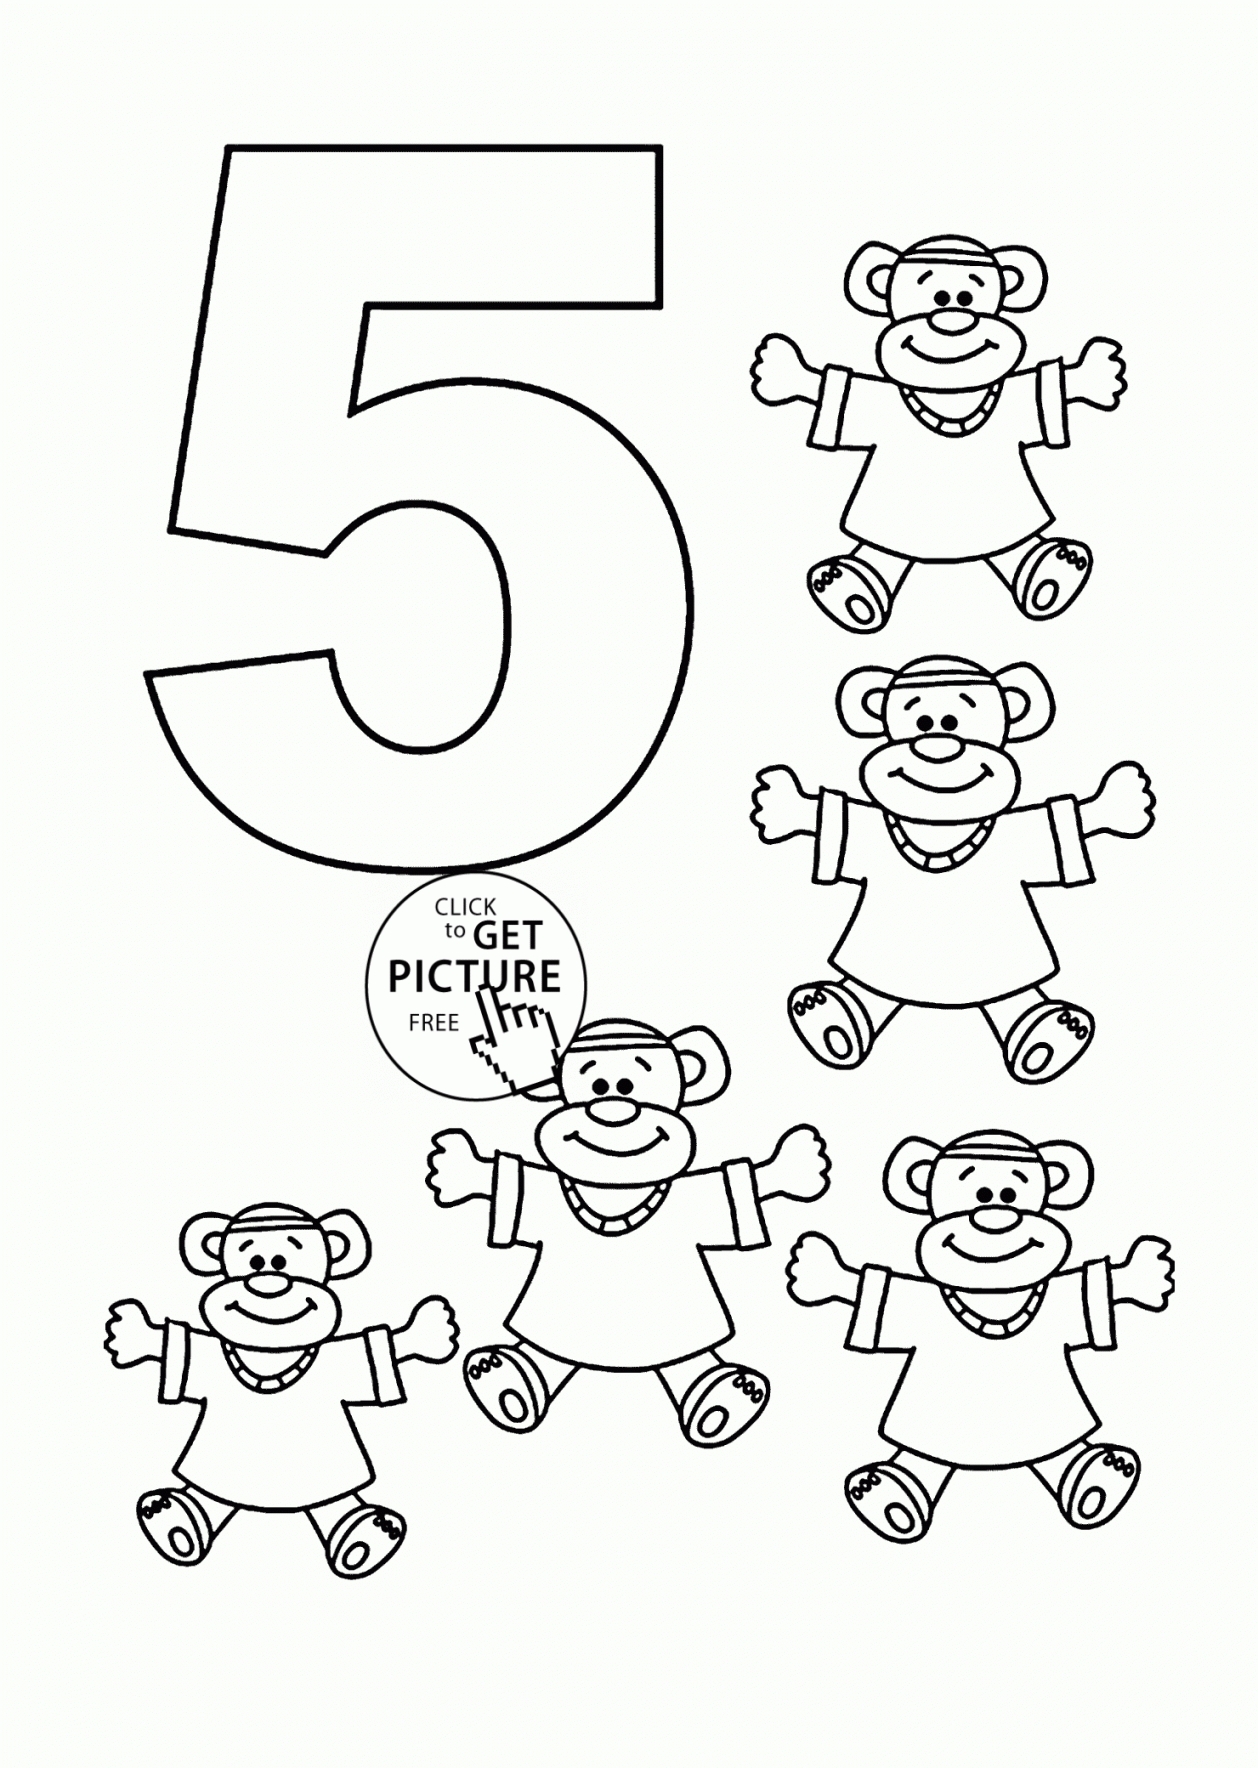 worksheet ~ Colouring Numbers Printable Free Worksheets Coloring Pages For  Adults 51 Astonishing Colouring Numbers Printable. Printable Coloring Pages  For Adults. Colouring Numbers Printable Pages For Adults. Colouring Numbers  Printable Worksheets From